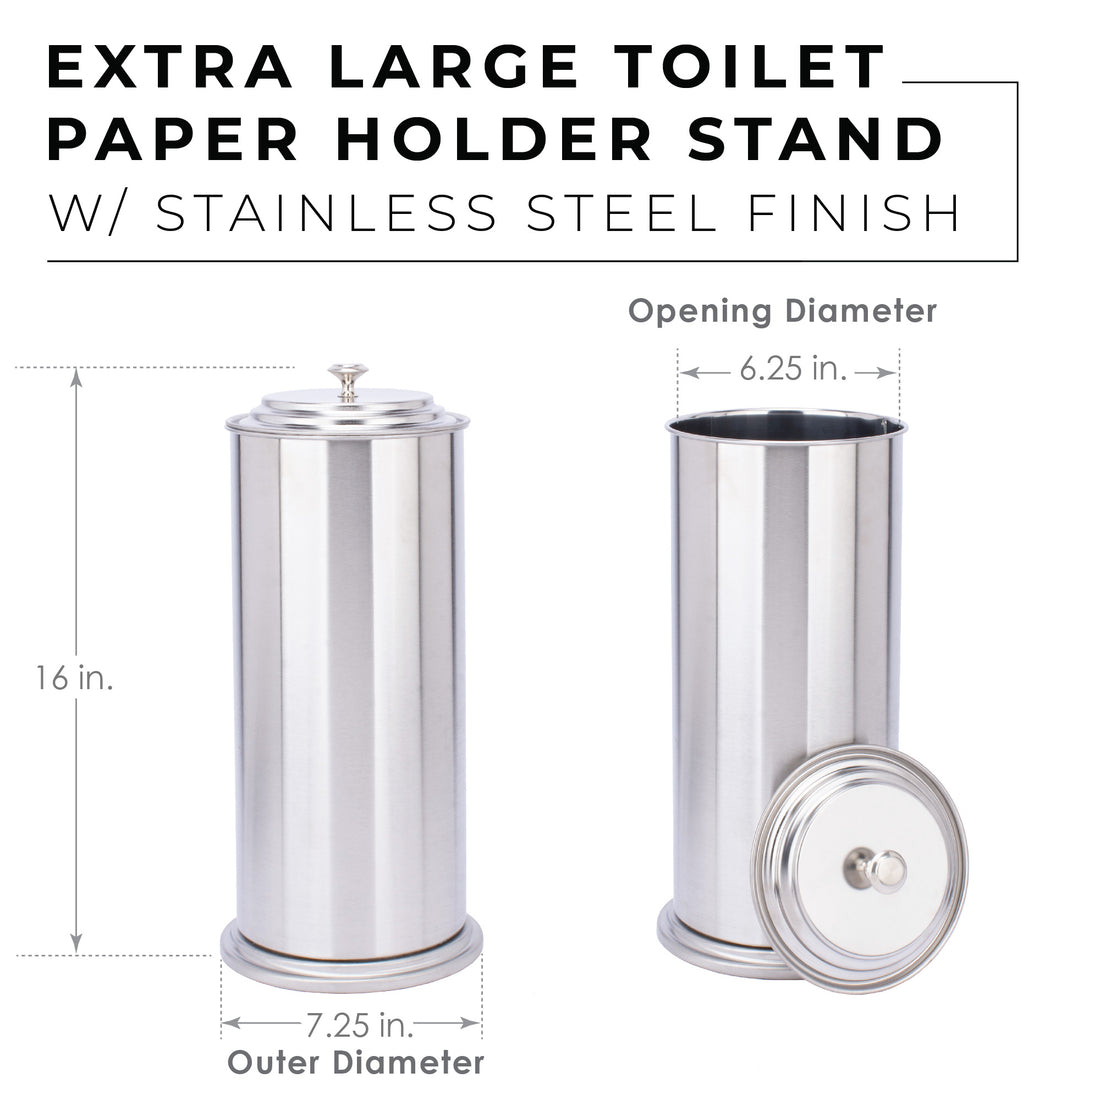 Freestanding Extra Large Toilet Paper Holder  (Stainless Steel Finish)